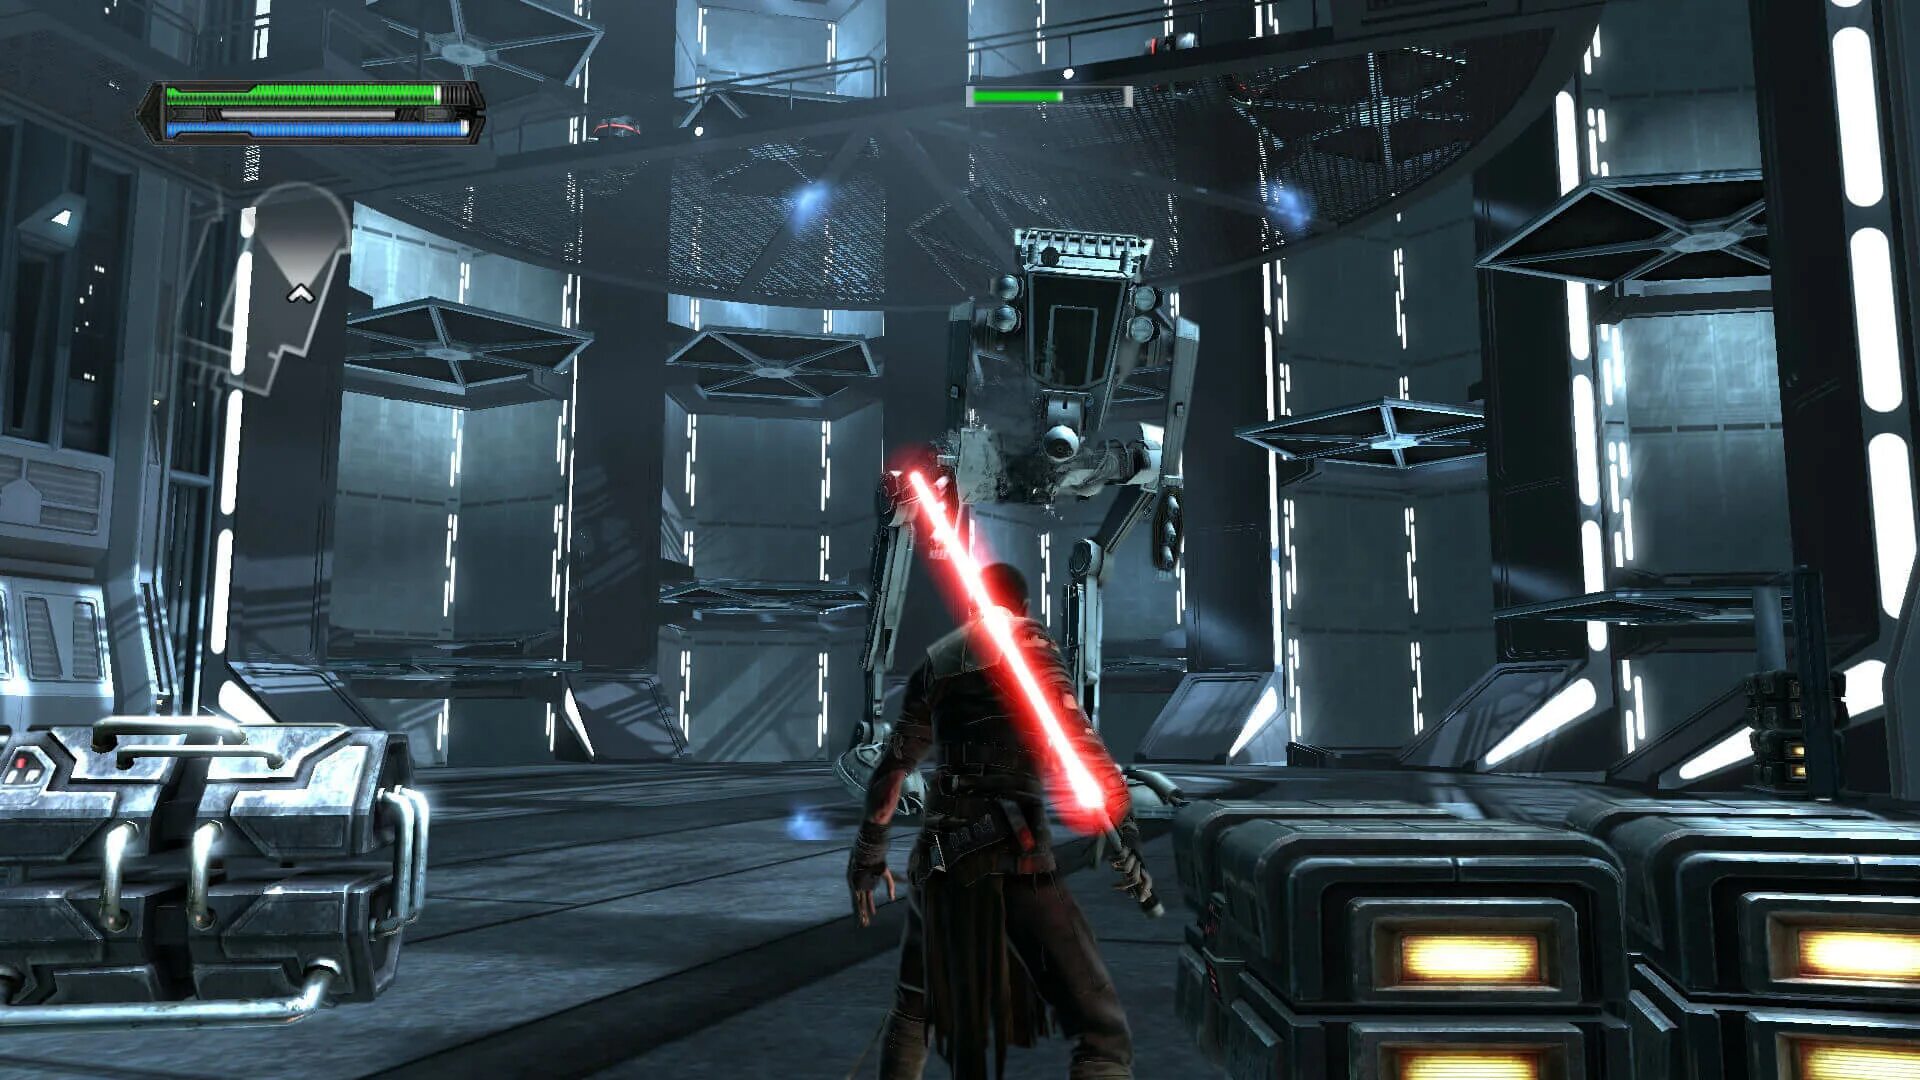 Игра Star Wars unleashed 3. Star Wars: the Force unleashed. Star Wars: the Force unleashed - Ultimate Sith Edition. Star Wars the Force unleashed 1.